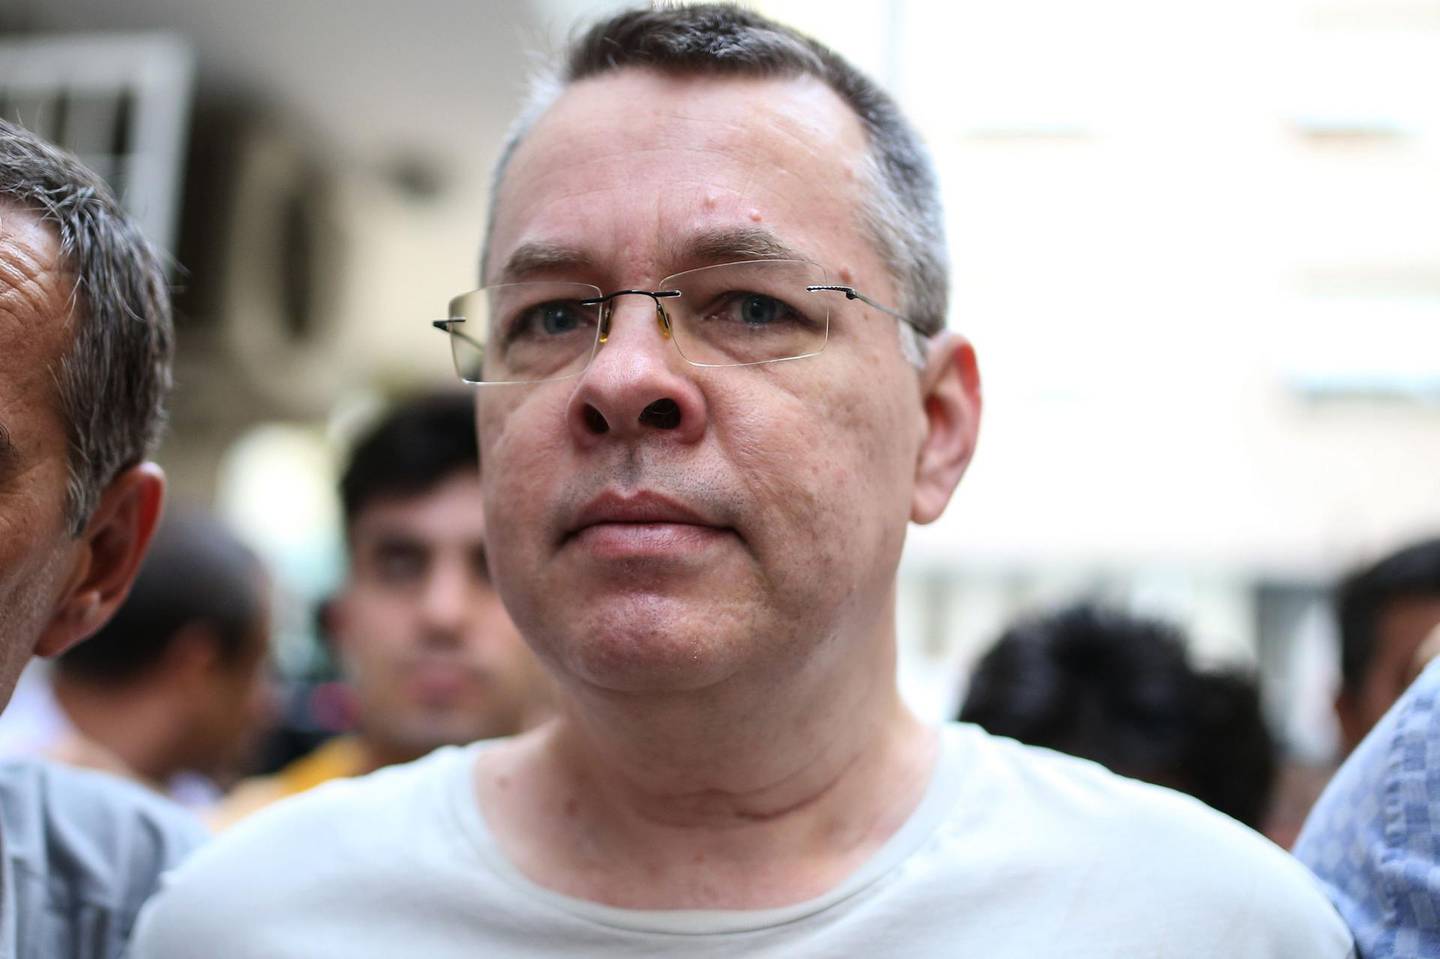 (FILES) In this file photograph taken on July 25, 2018, US pastor Andrew Craig Brunson is escorted by Turkish plain clothes police officers to his house in Izmir. - President Donald Trump's administration has rejected Turkey's offer to condition the release of an American pastor on clearing a top Turkish bank of billions of dollars in US fines, media reported August 20, 2018. Washington and Ankara are locked in a bitter feud over the nearly two-year jailing of Andrew Brunson over disputed terror charges, which has triggered a trade row and sent the lira into a tailspin. (Photo by - / AFP)